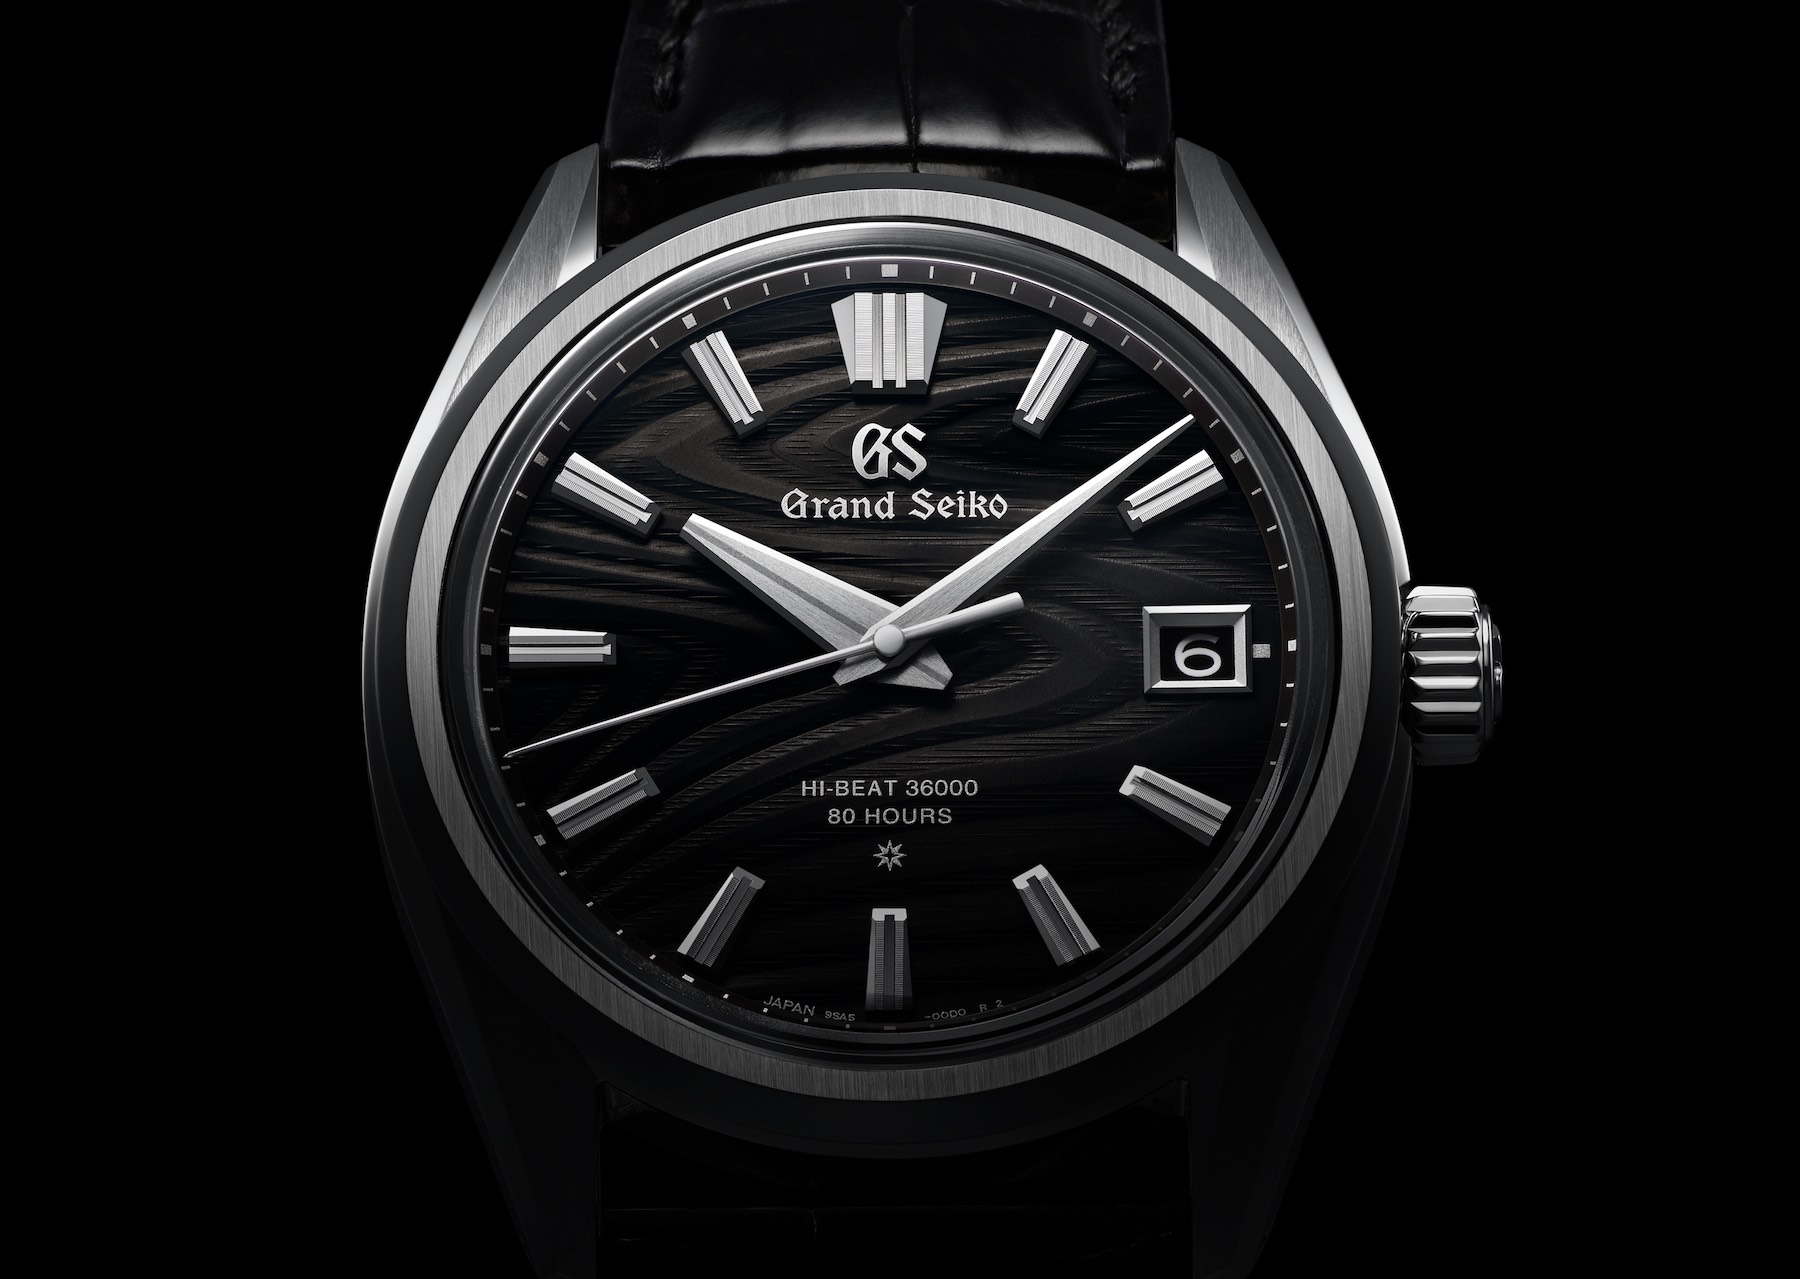 Grand Seiko SLGH007 140th Anniversary Limited-Edition Watch In Platinum |  aBlogtoWatch